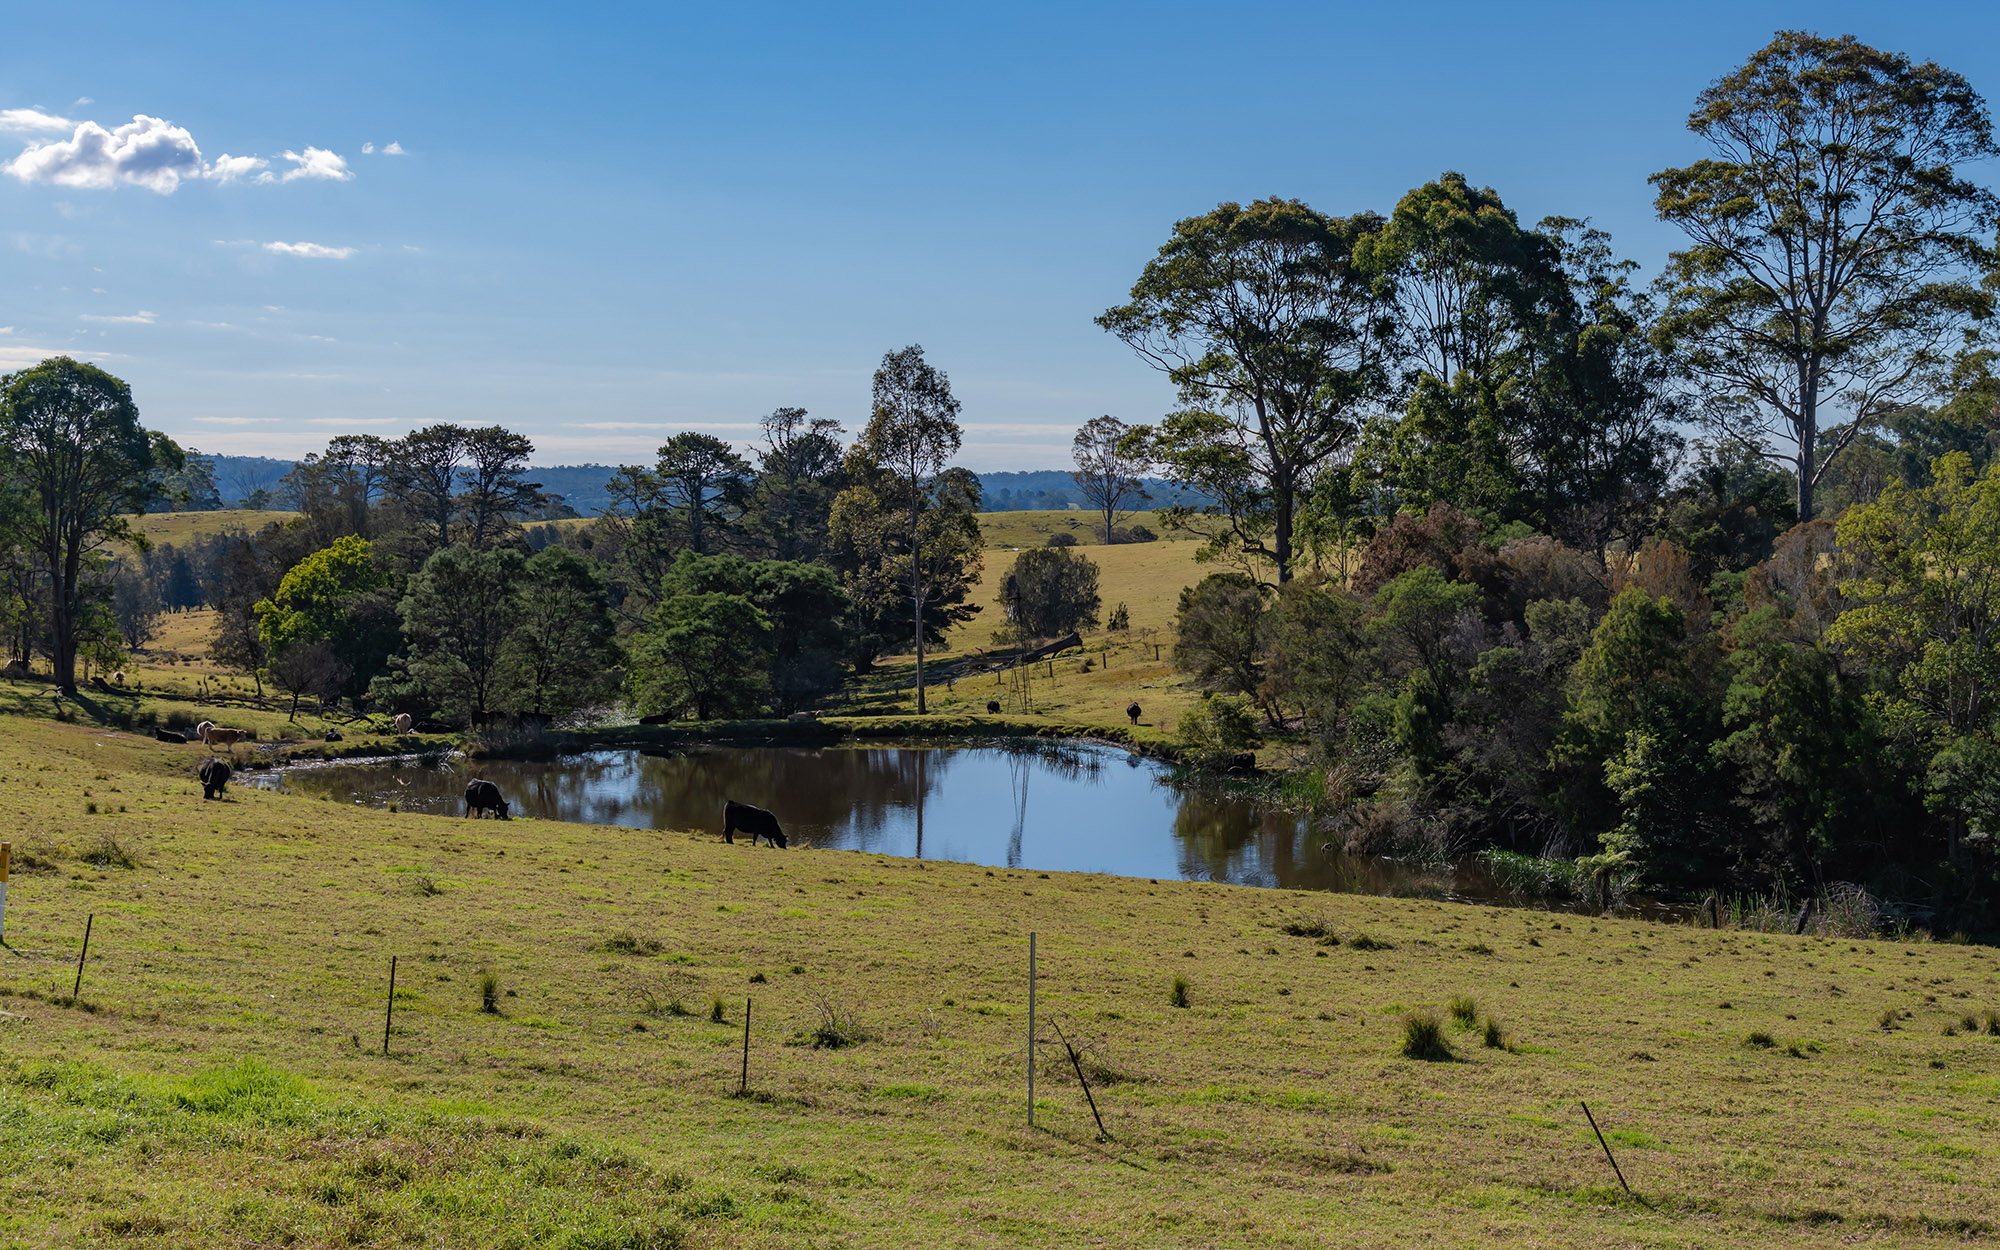 Dam in a paddock with many trees around it